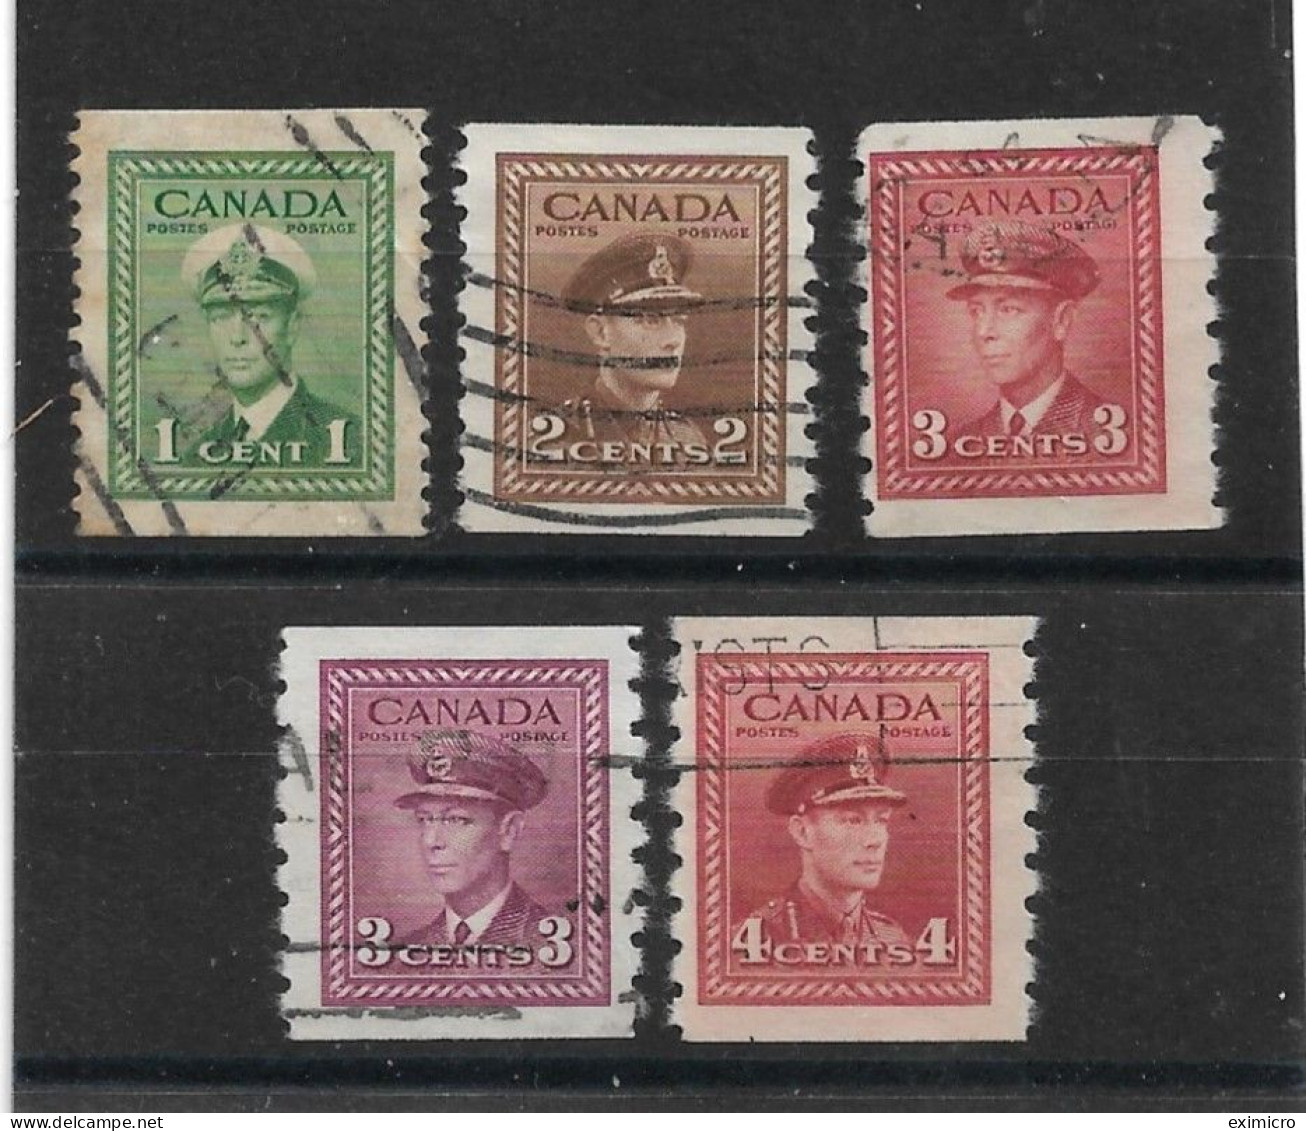 CANADA 1942 - 1943 COIL STAMPS SET IMPERF X PERF 8 SG 389/393 FINE USED Cat £26 - Oblitérés